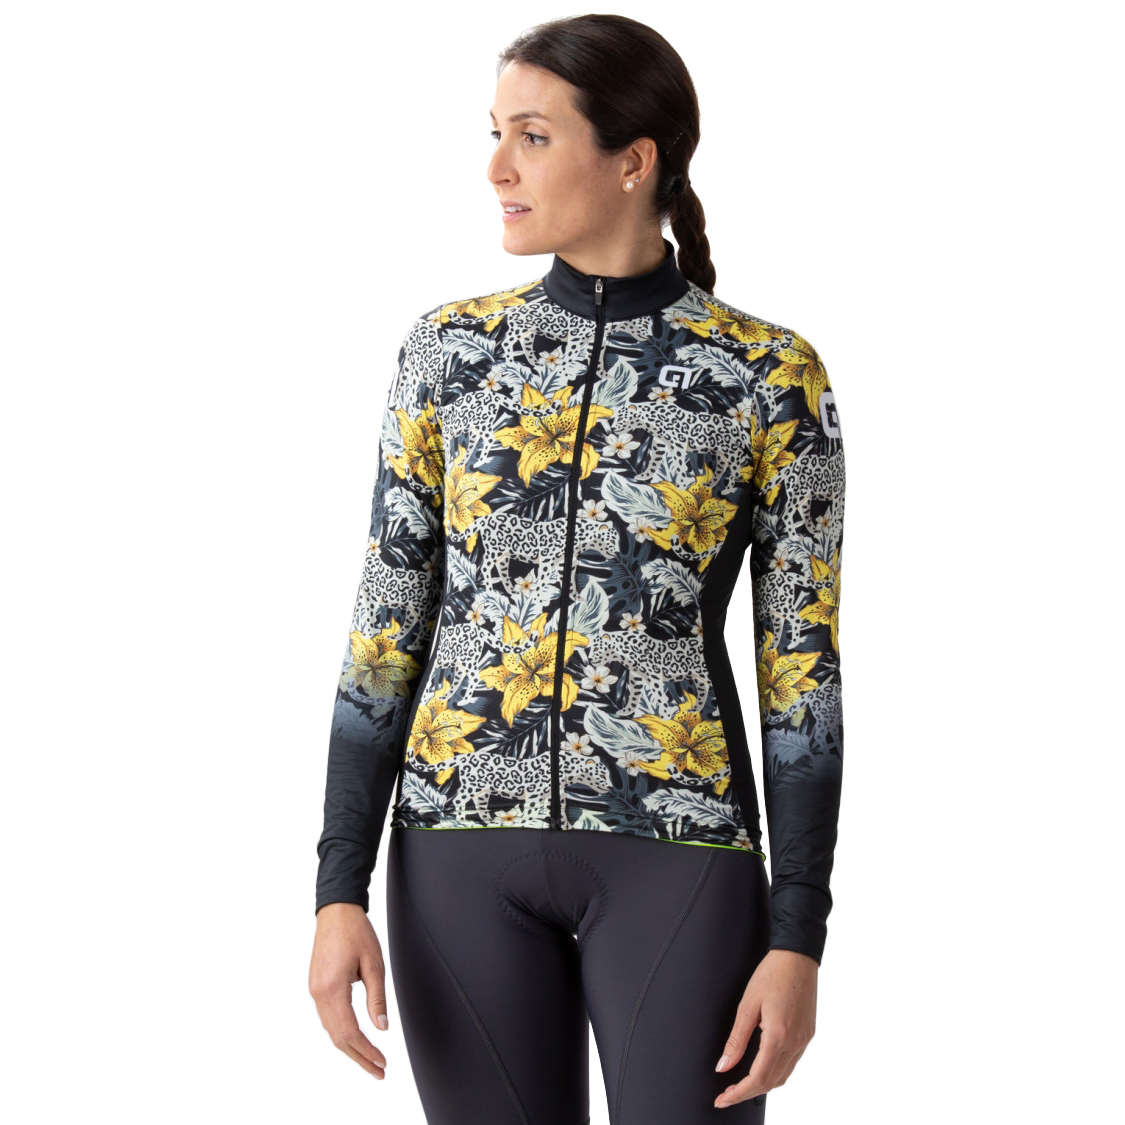 Picture of Alé PR-E Hibiscus Long Sleeve Jersey Women - yellow